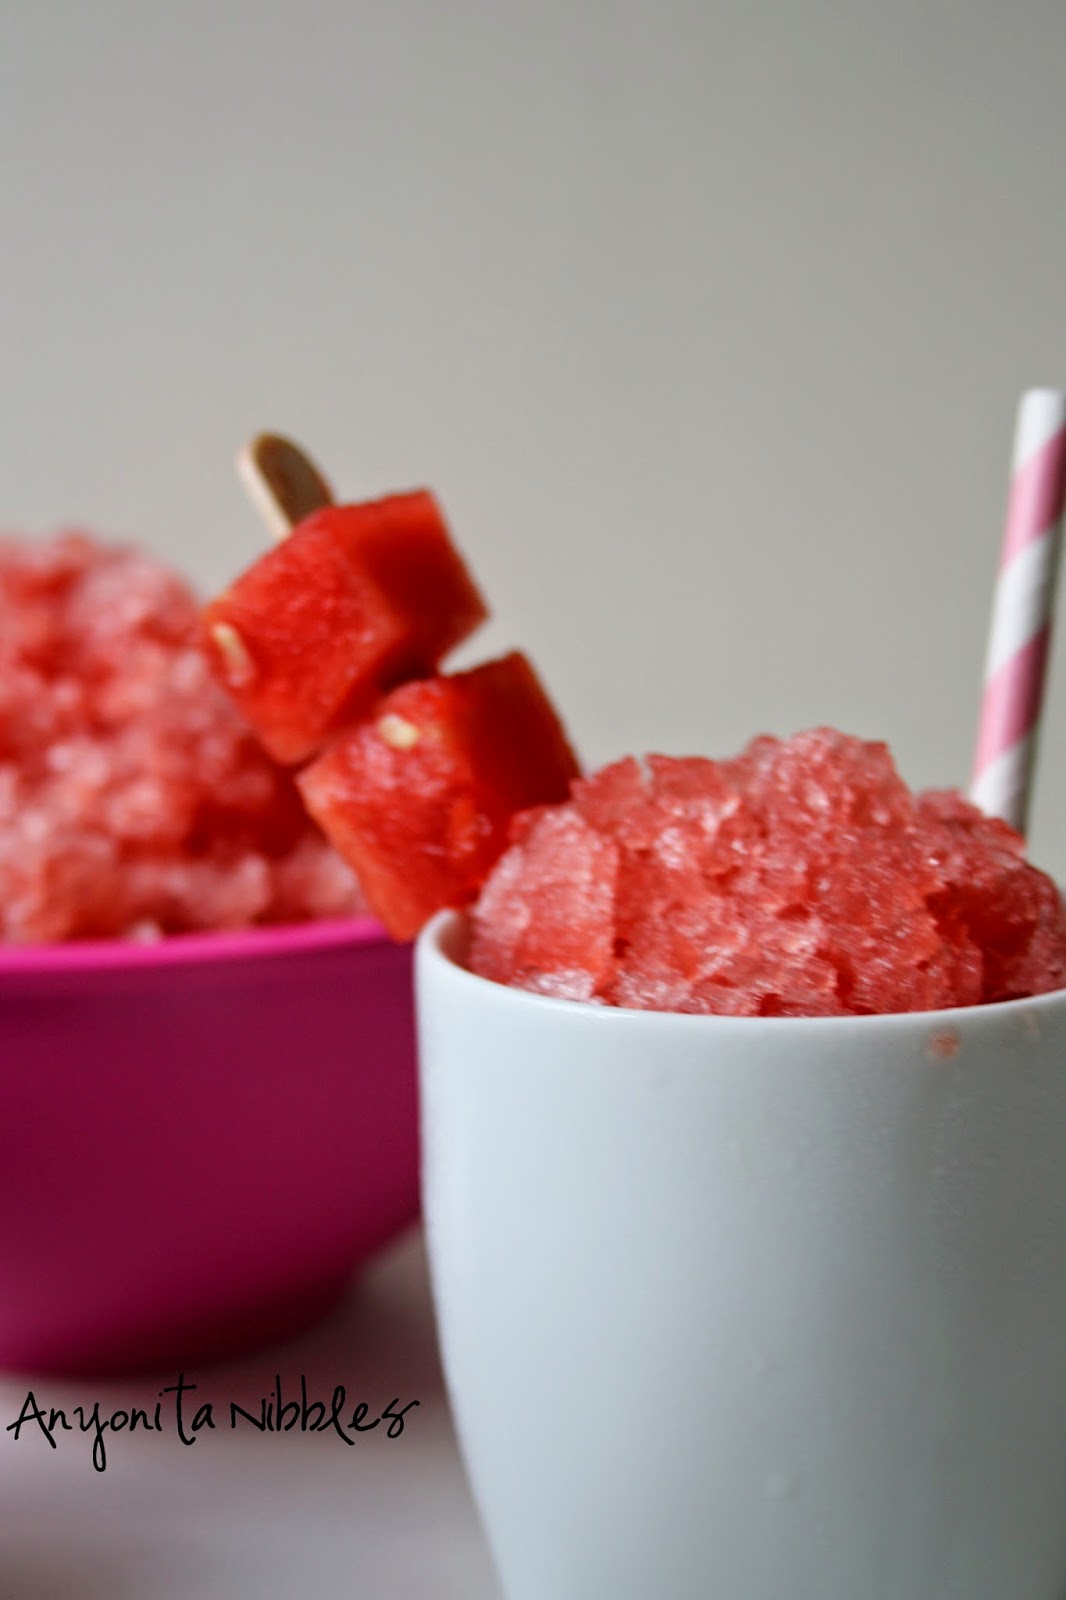 Indulge in this icy, better for you summer treat from Anyonita Nibbles